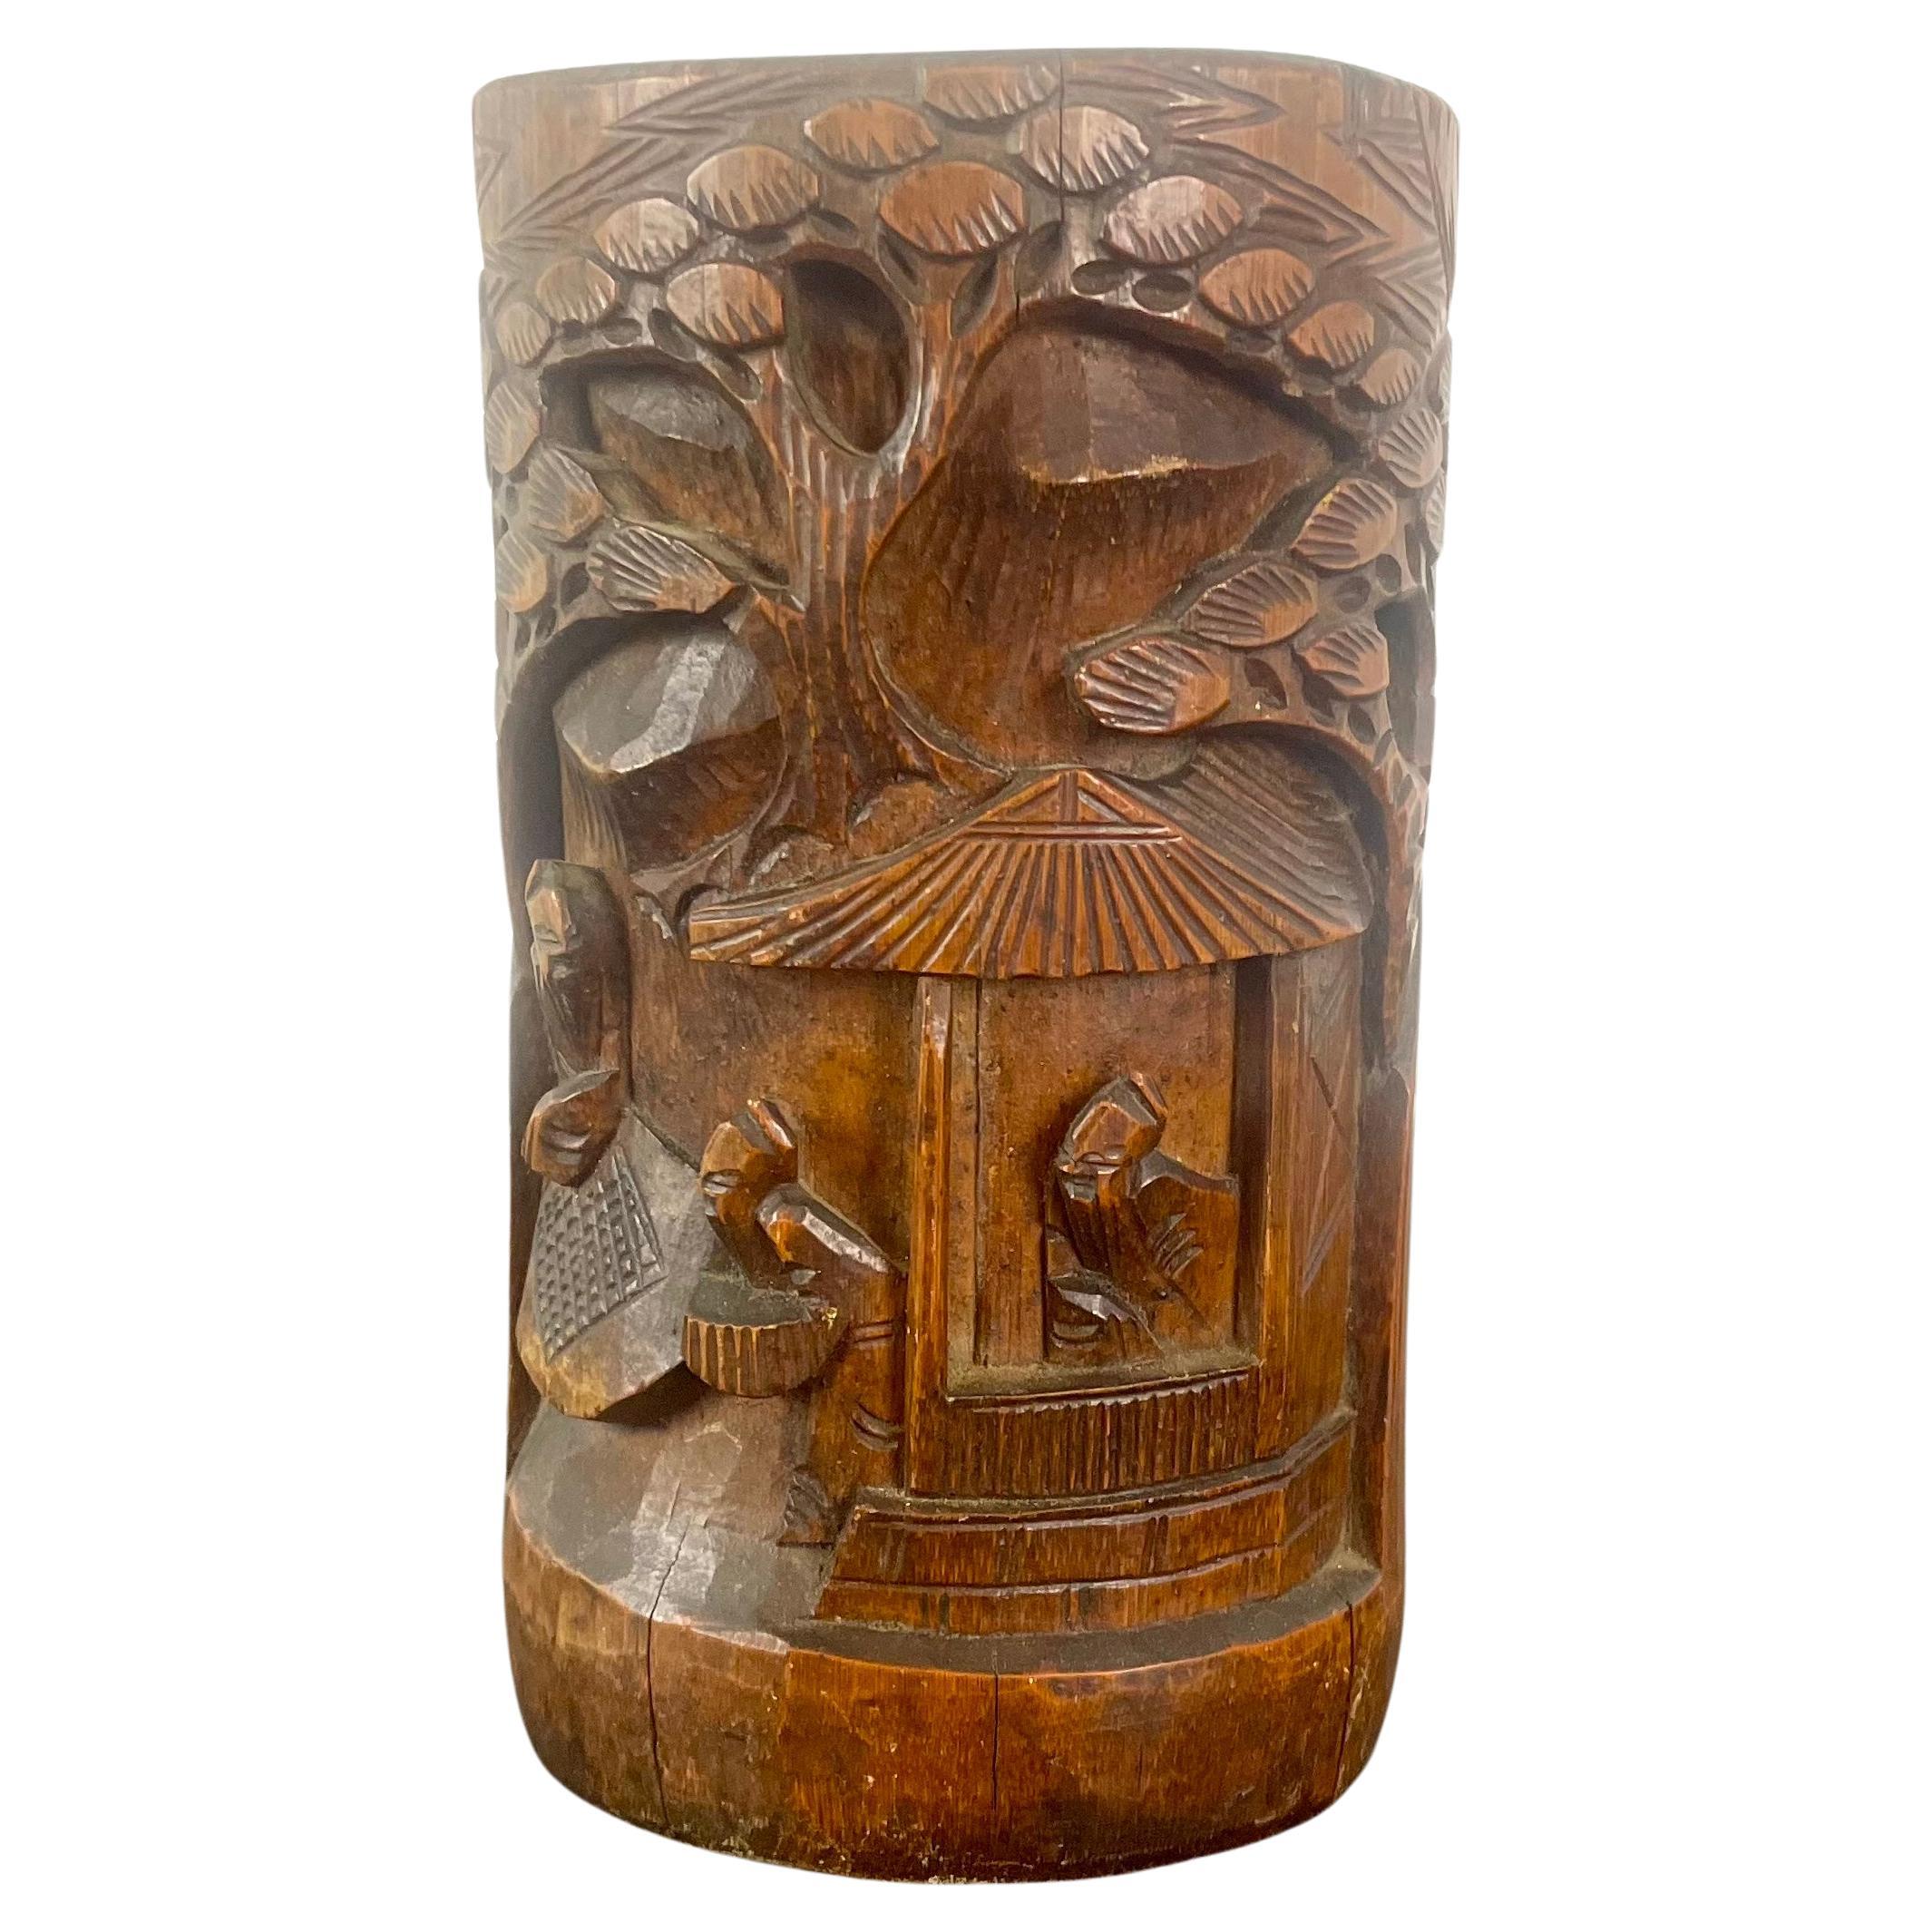 Hand carved bamboo vase/brush pot/bitong.

This hand-carved Chinese bamboo bitong or dried flower vase dates from the late Victorian period, circa 1880.

The bitong, or brush pot, is traditionally carved.
This vase is ideal for decoration with dried